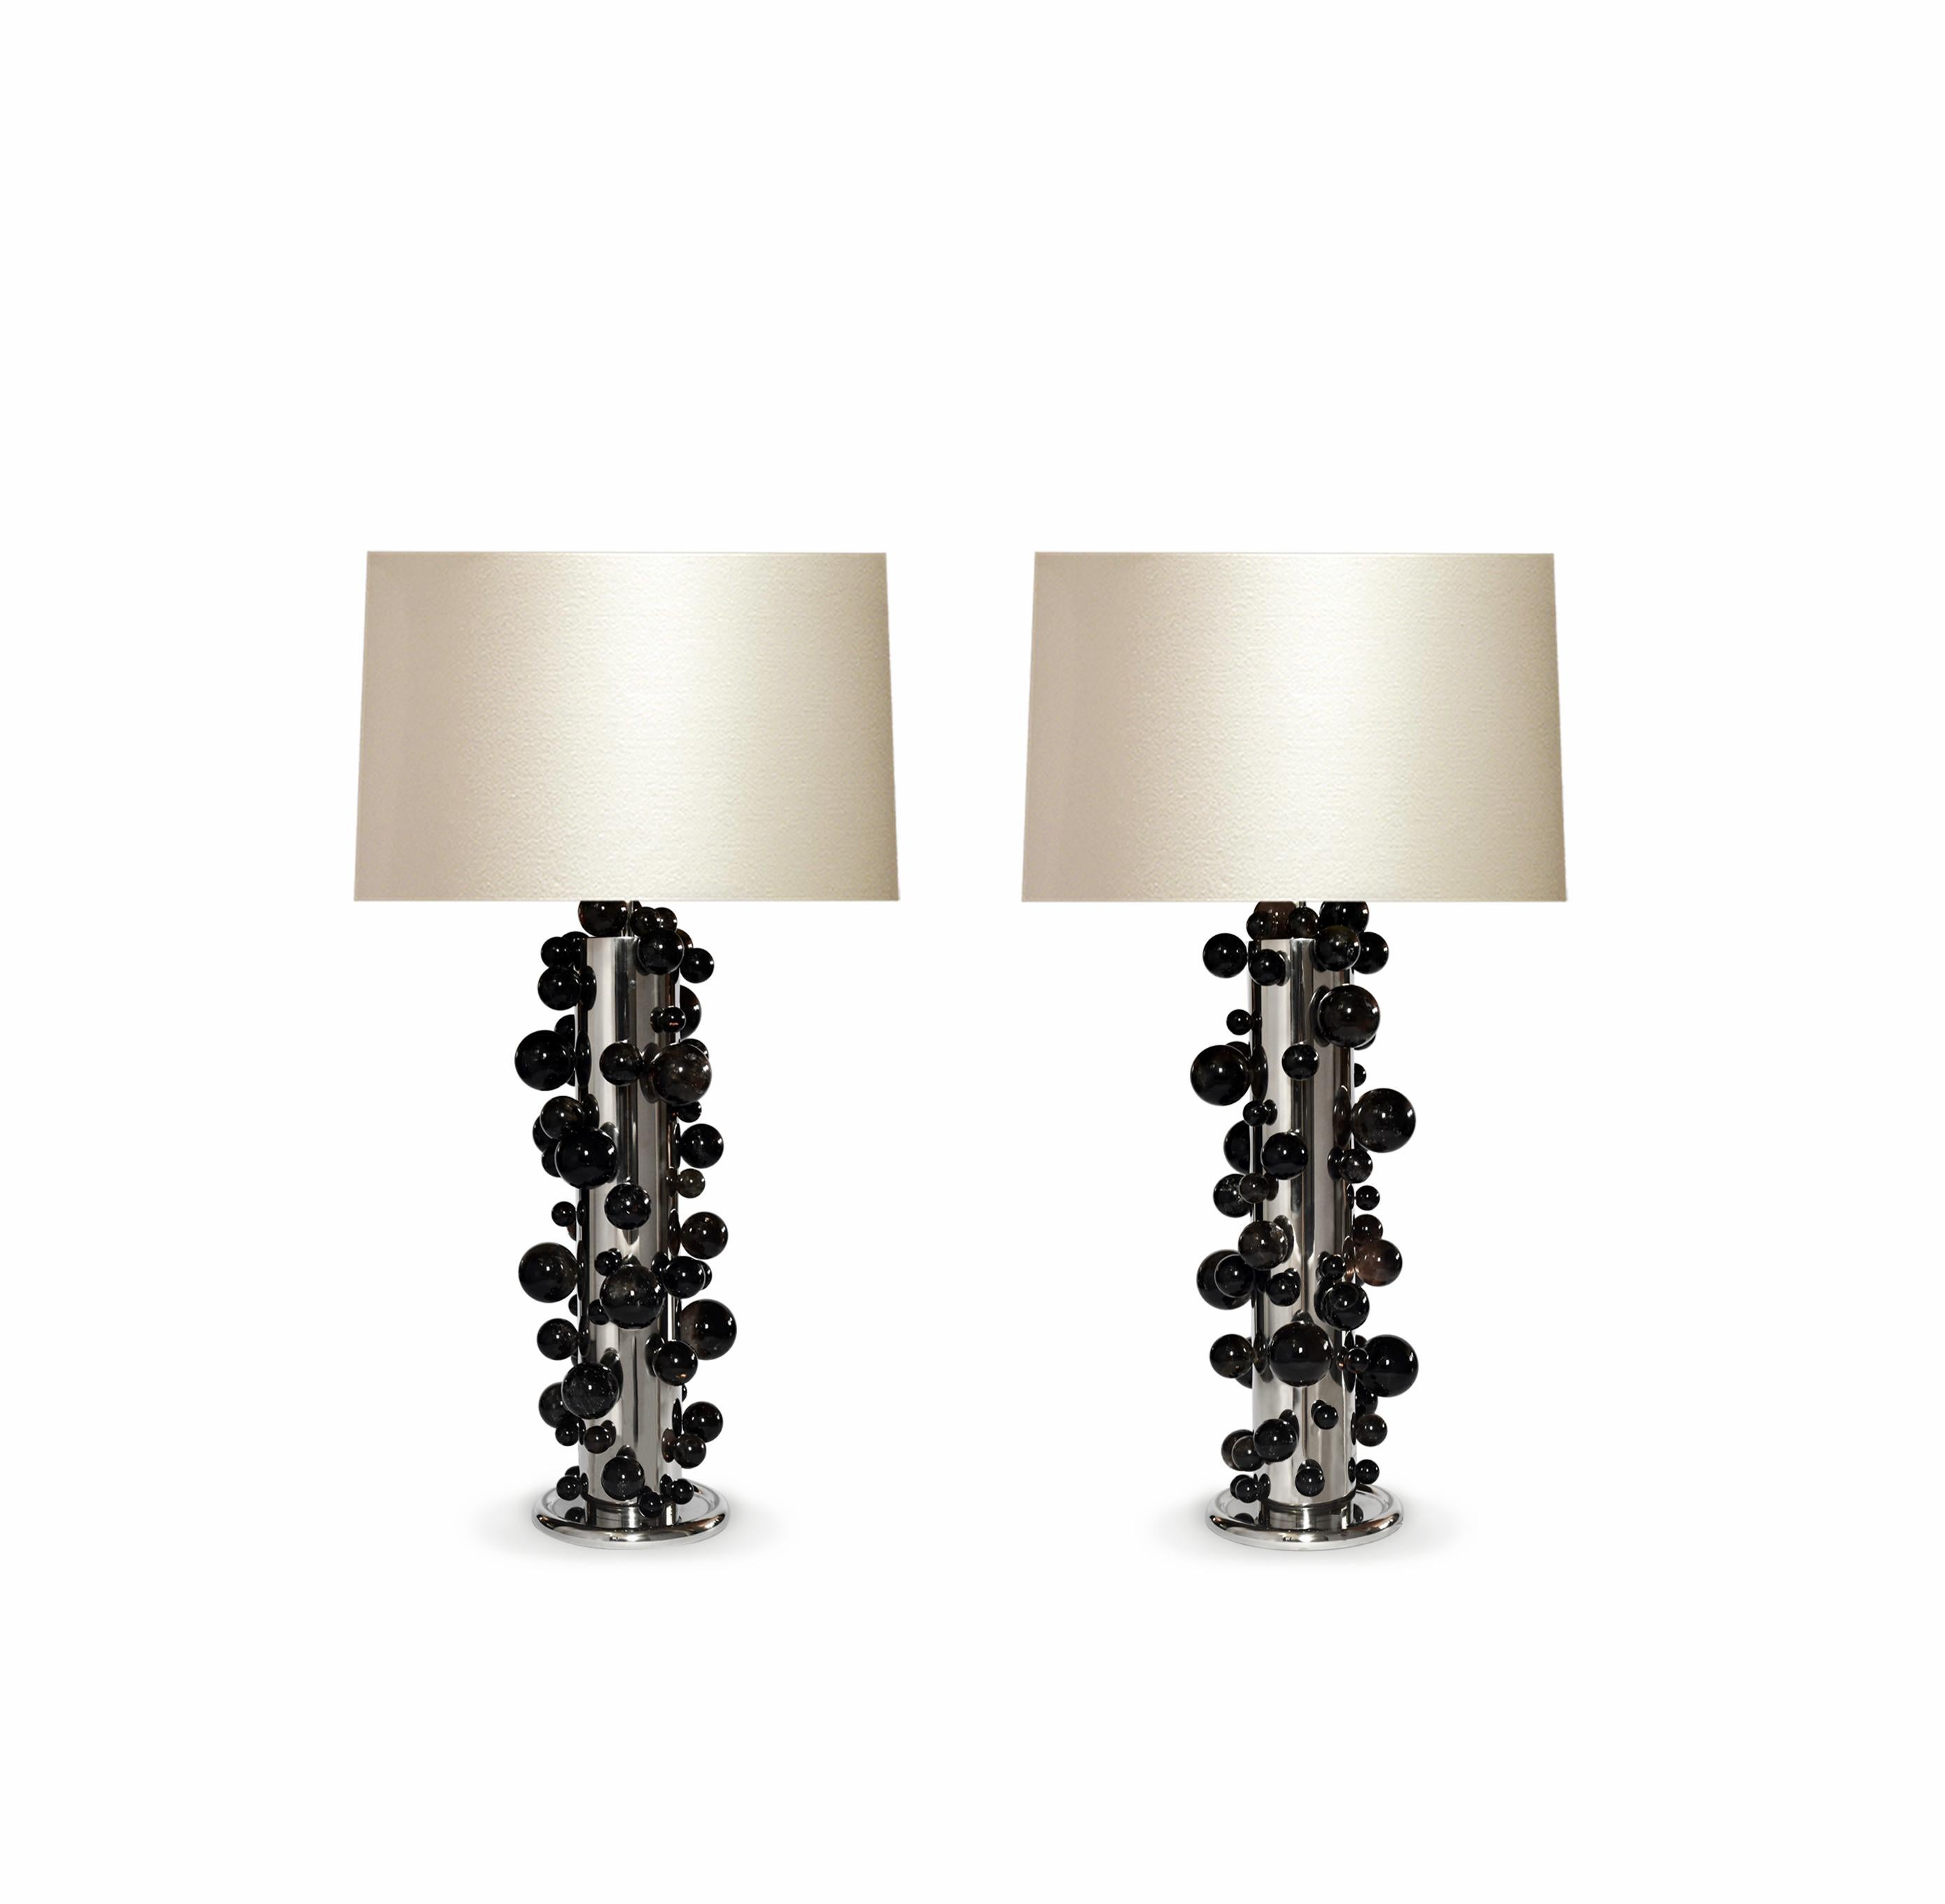 A tall pair of luxury dark rock crystal quartz bubble lamps with nickel plating frames. Created by Phoenix Gallery, NYC.
Each lamp installed two sockets.
To the top of the rock crystal 25.75